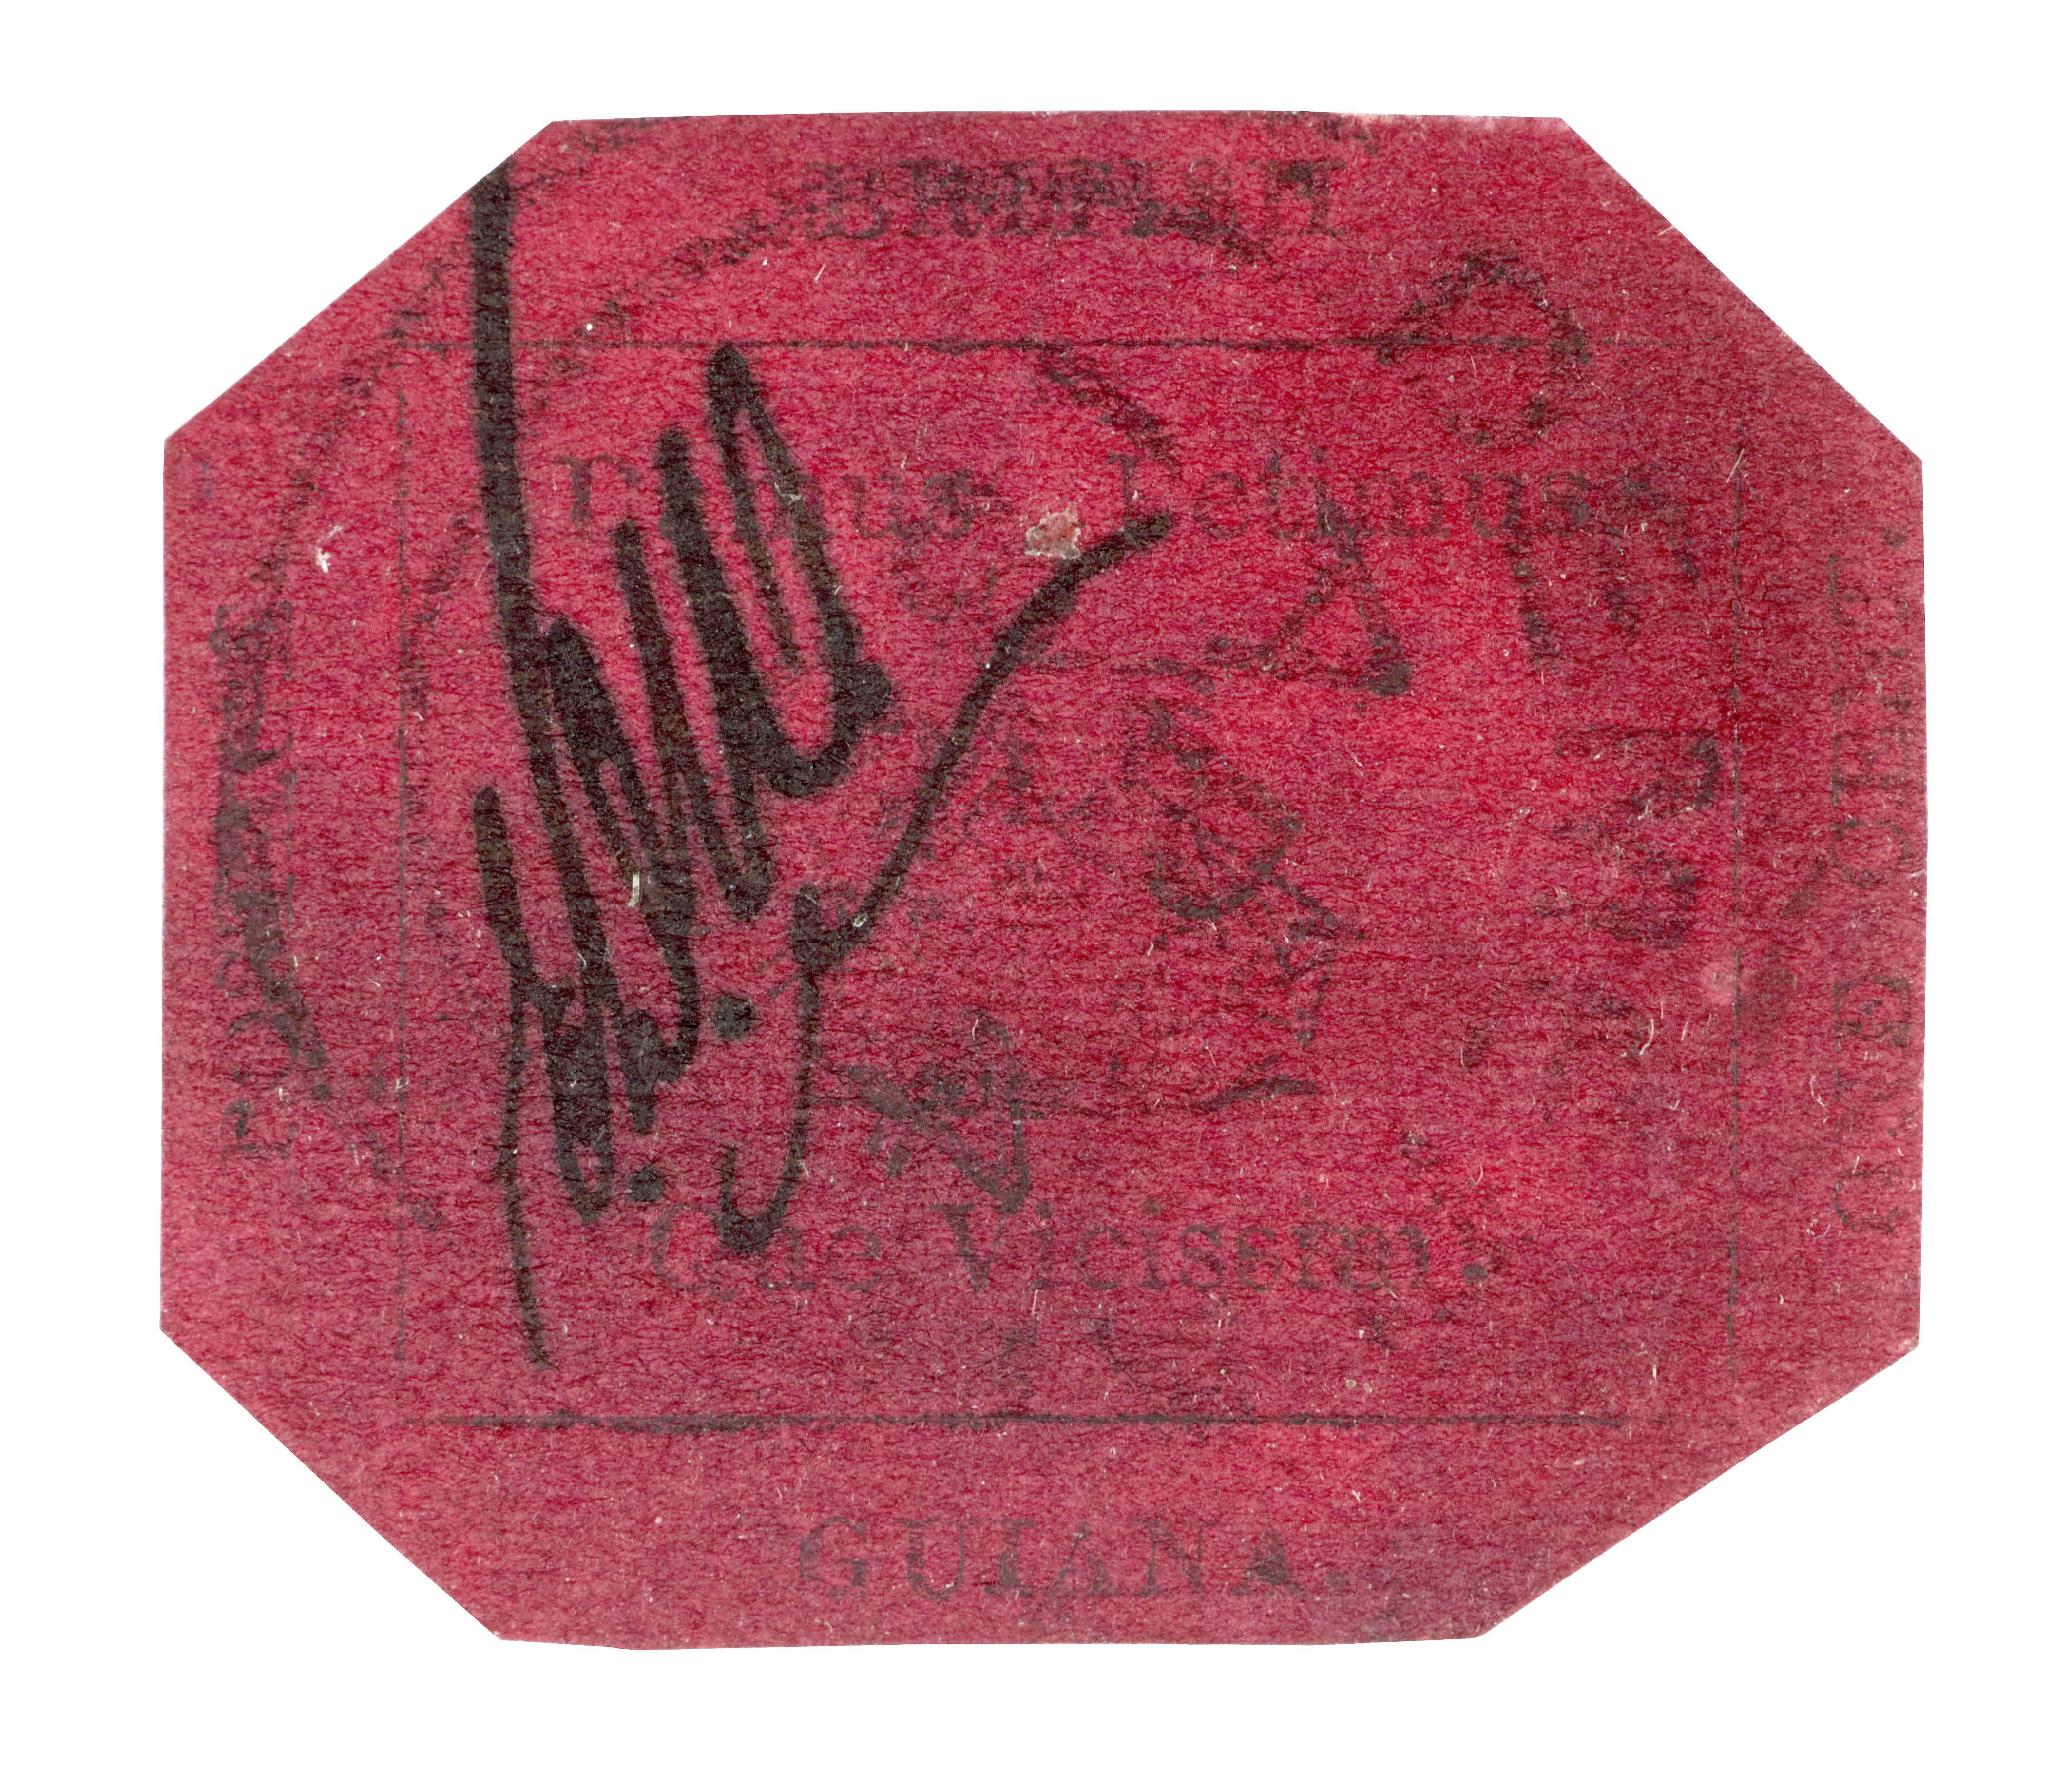 The magenta side of the stamp, which says “British Guiana” and “Damus Petimus Que Vicissim”